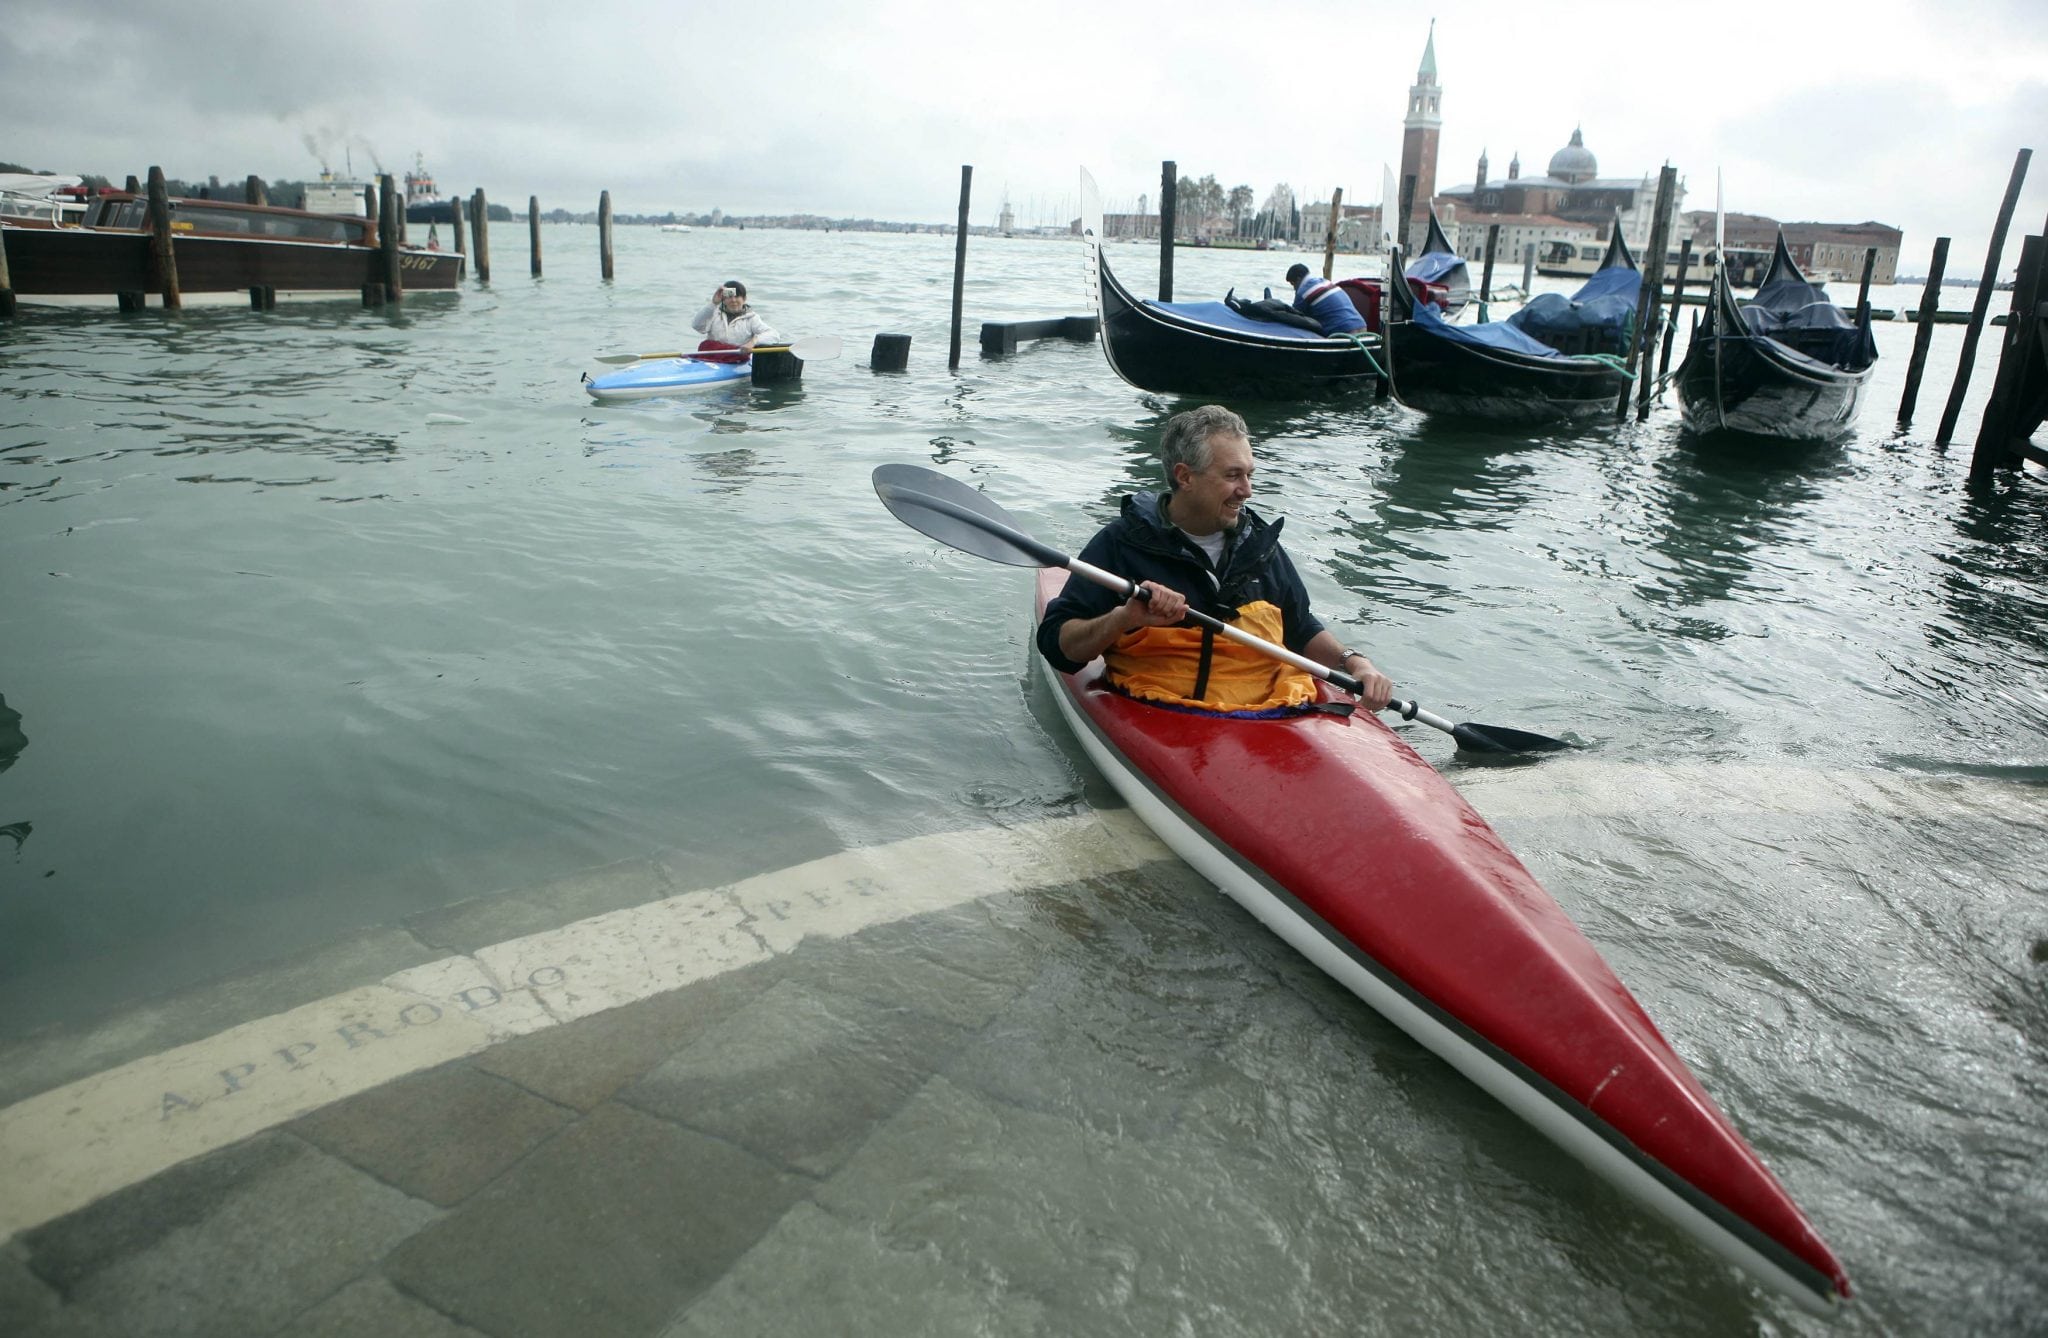  A man rows a kayak in front of flooded St. Mark's Square during a period of seasonal high water in Venice.